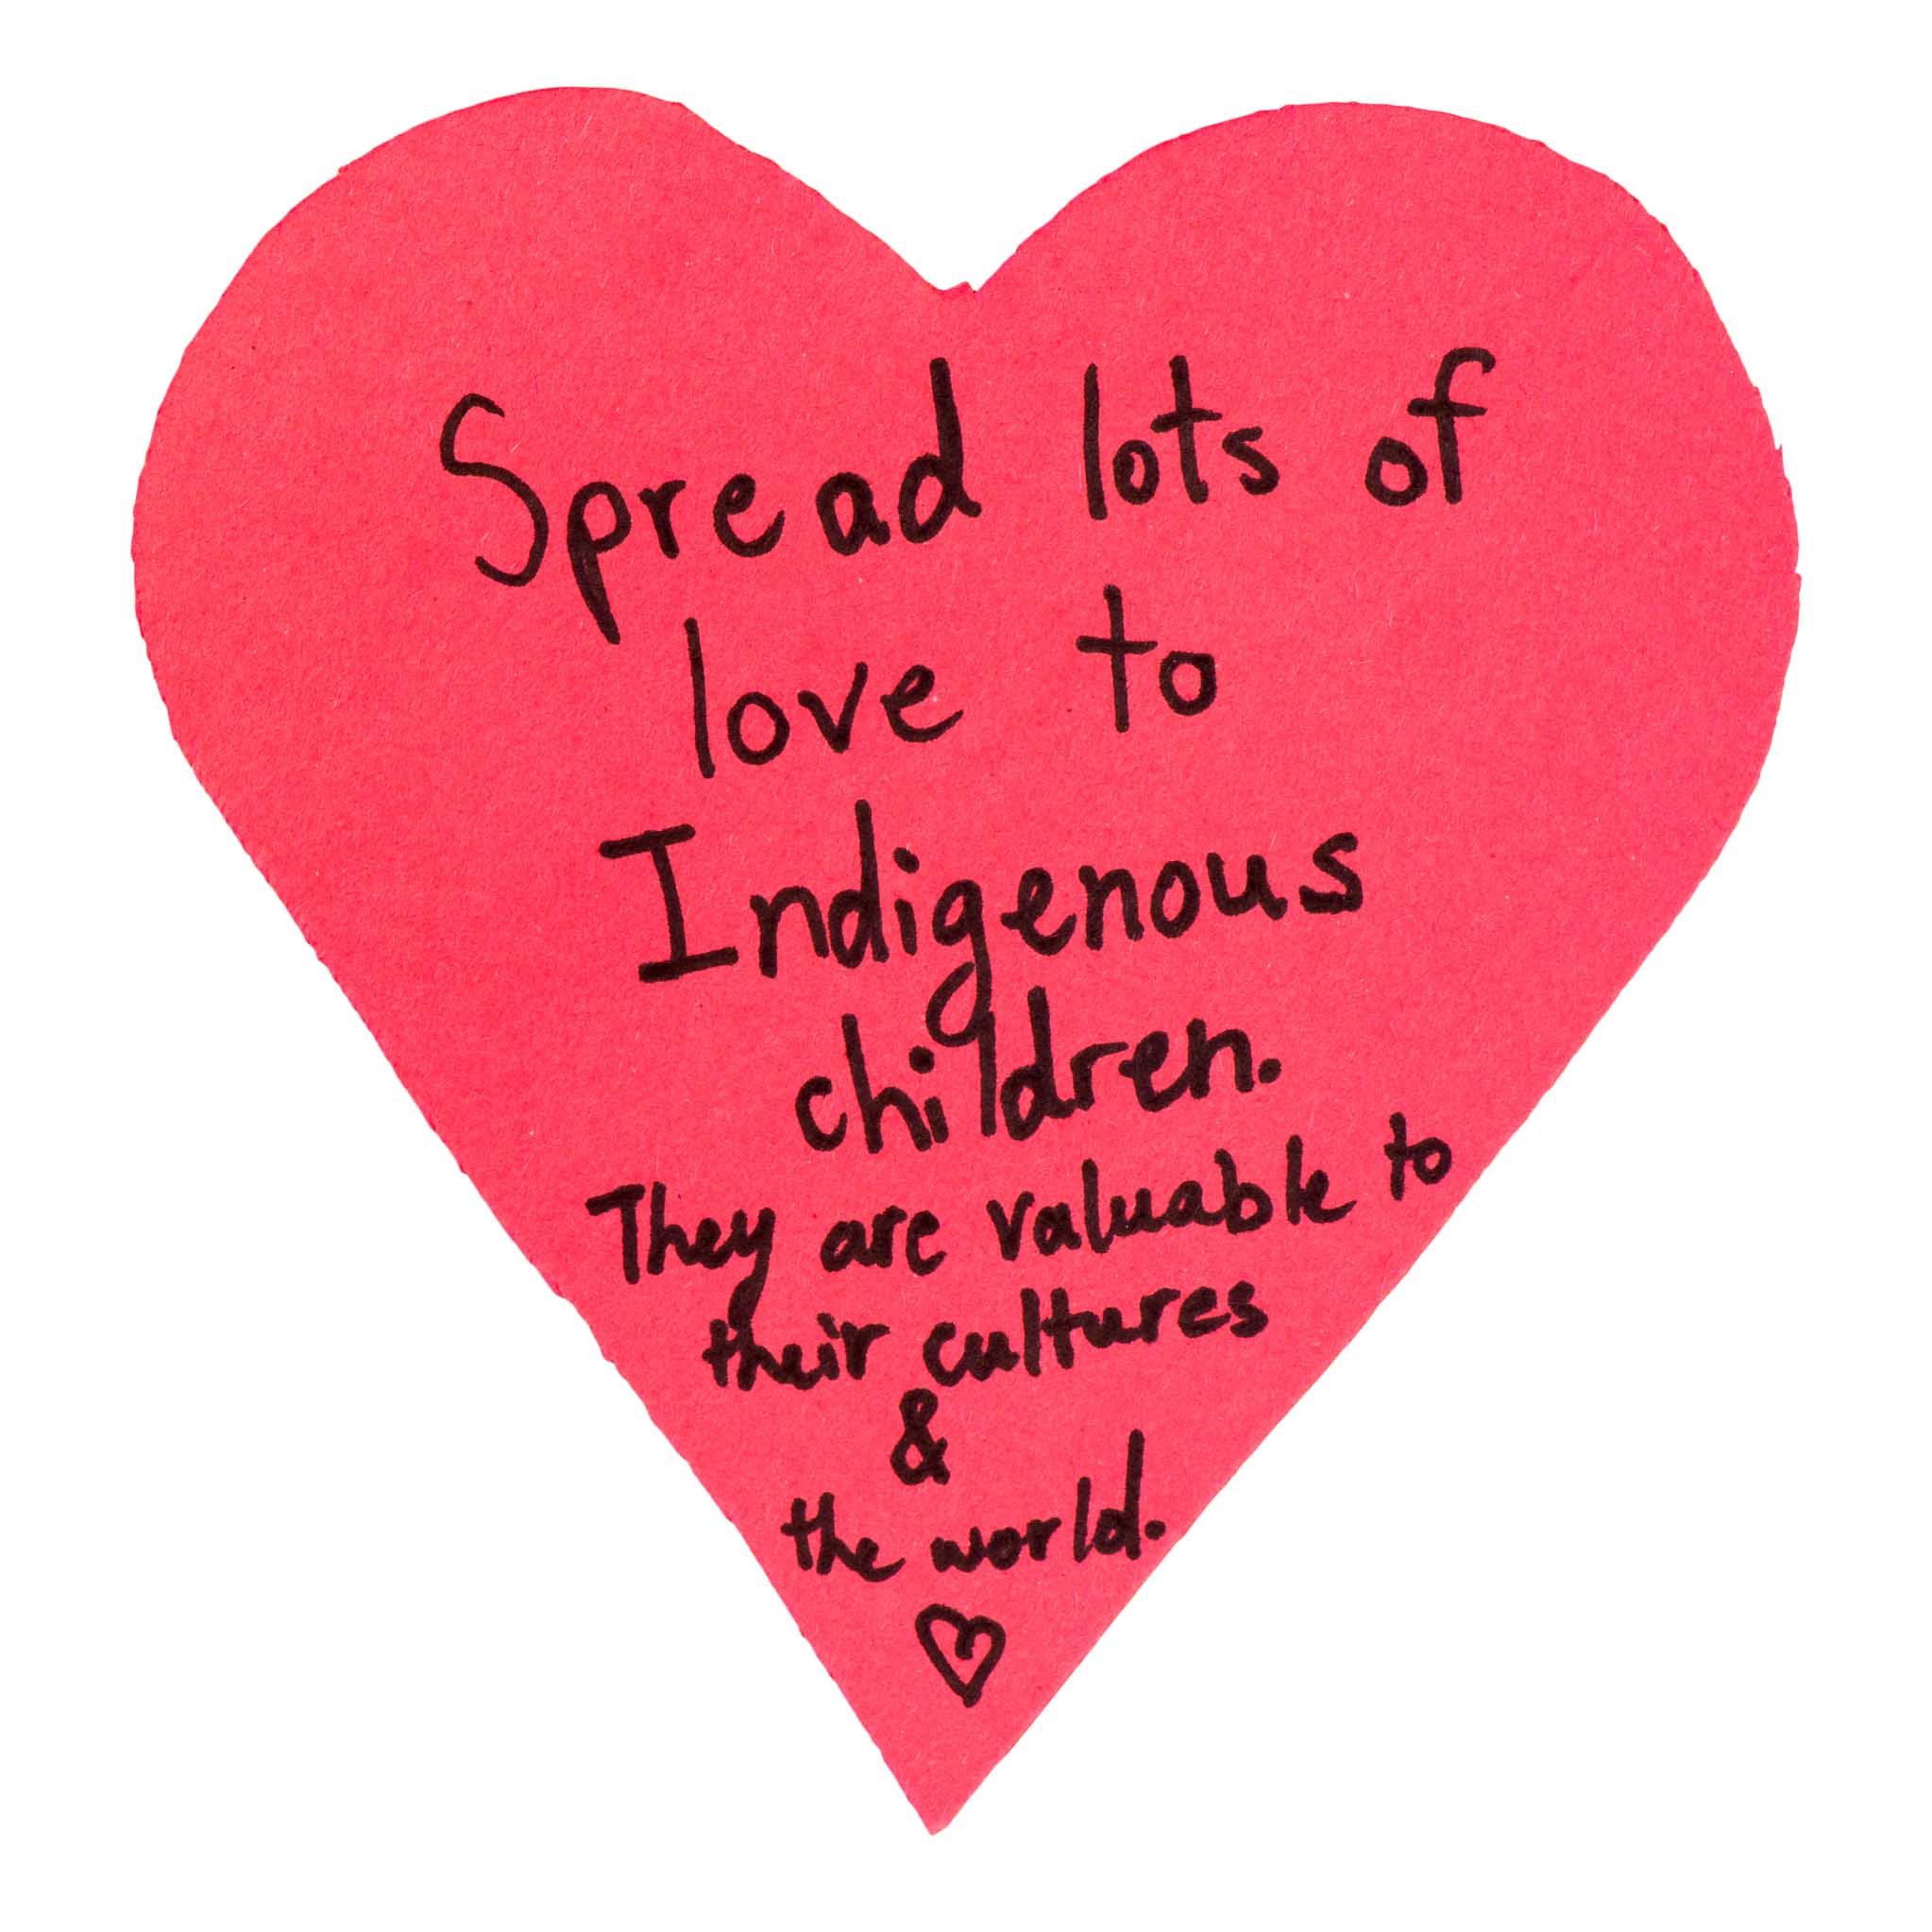 Paper heart with message reading: Spread lots of love to Indigenous Children. They are valuable to their cultures and the world.